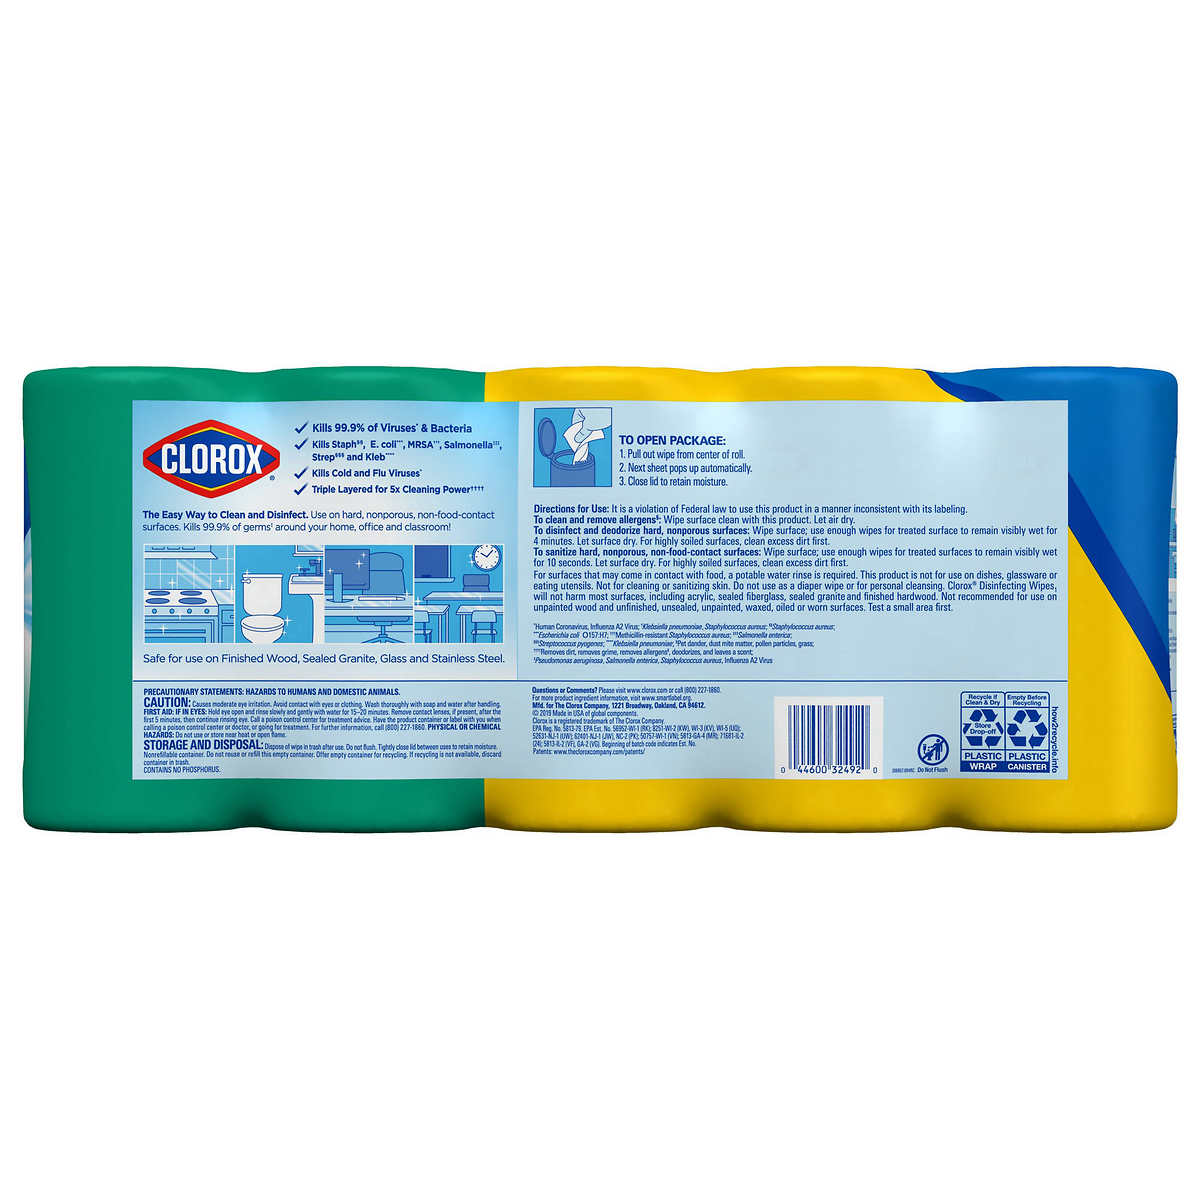 Clorox Disinfecting Wipes Value Pack, Bleach Free Cleaning Wipes, 85 Ct (5 Pack) - image 2 of 2